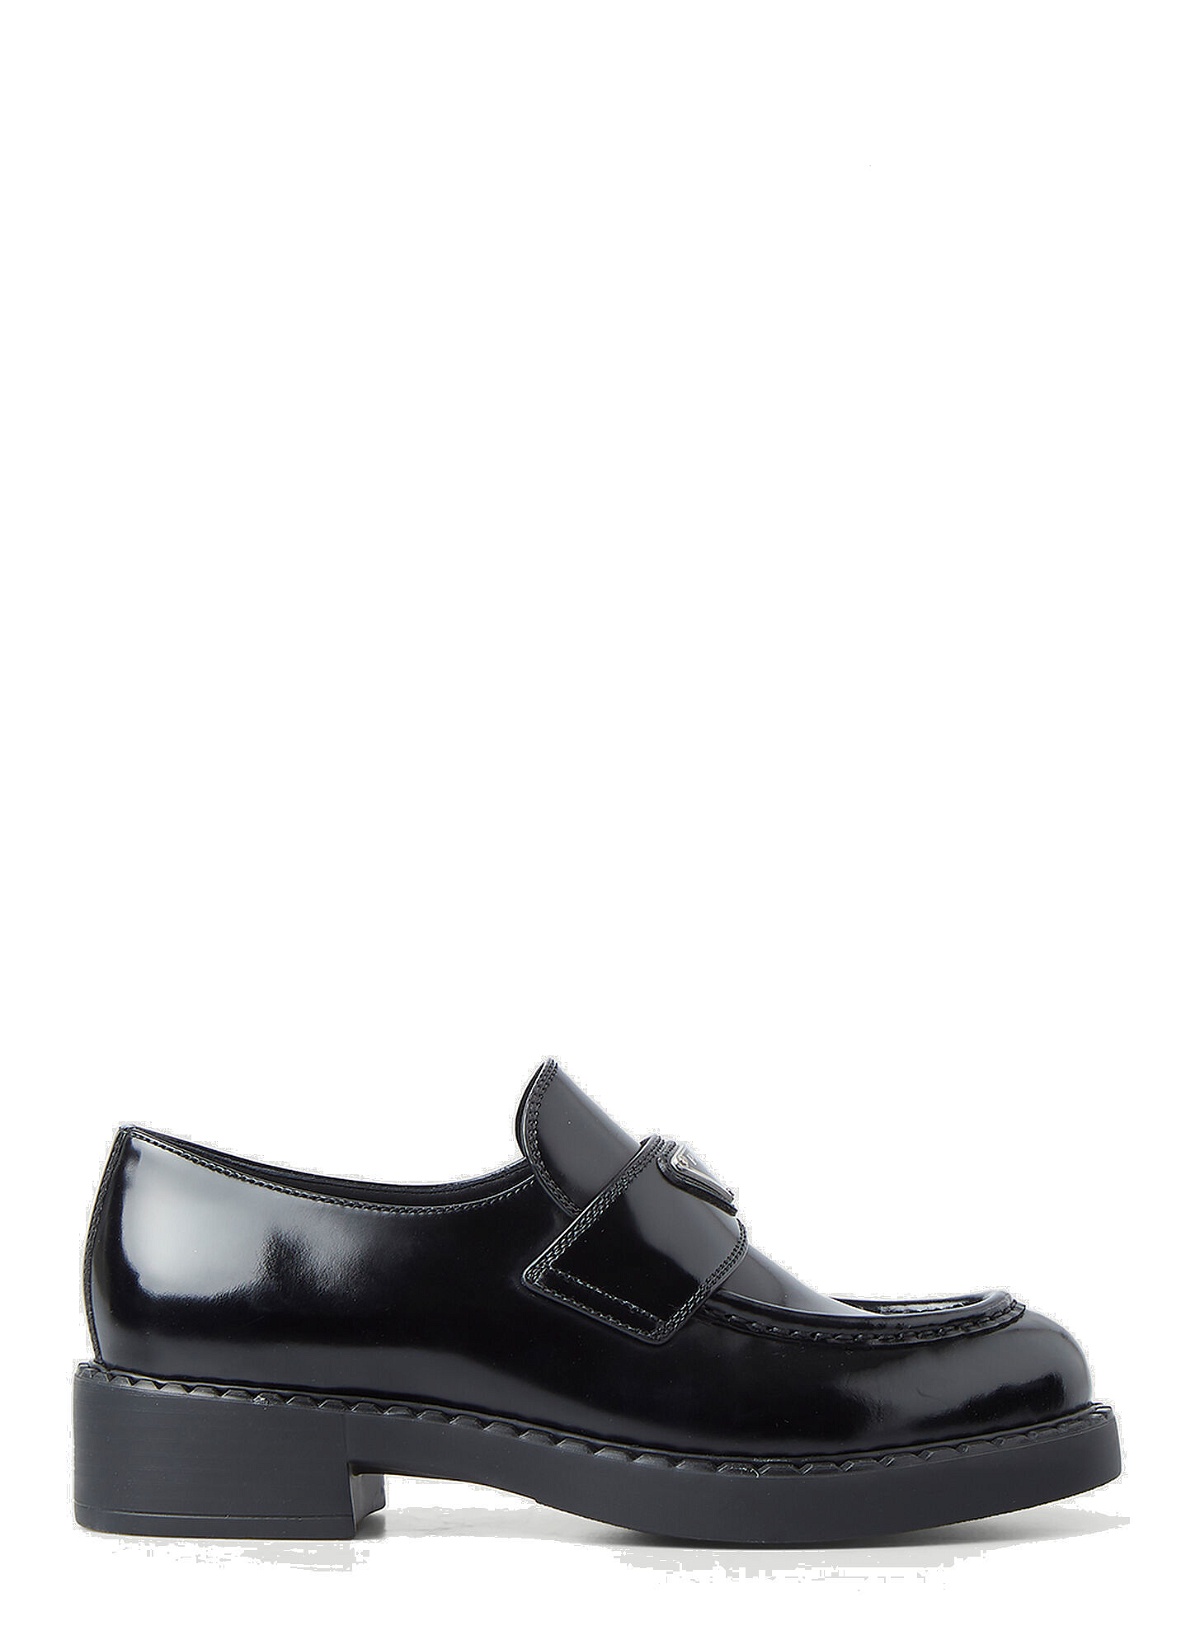 Photo: Logo Plaque Loafers in Black